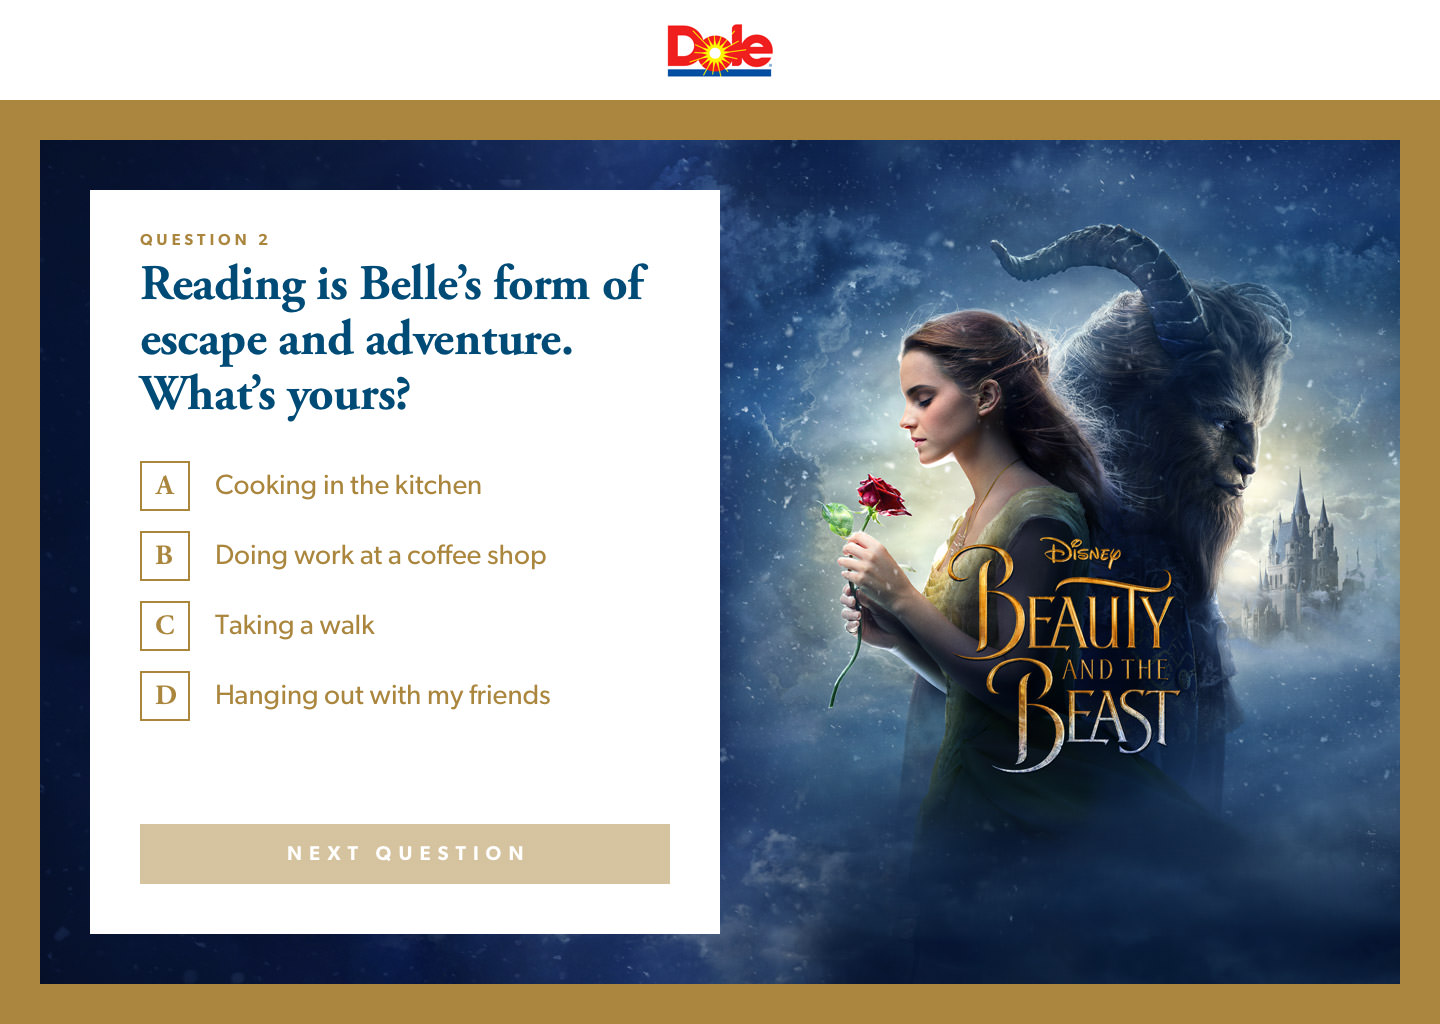 The Beauty & The Beast quiz design as part of the Dole/Disney partnership